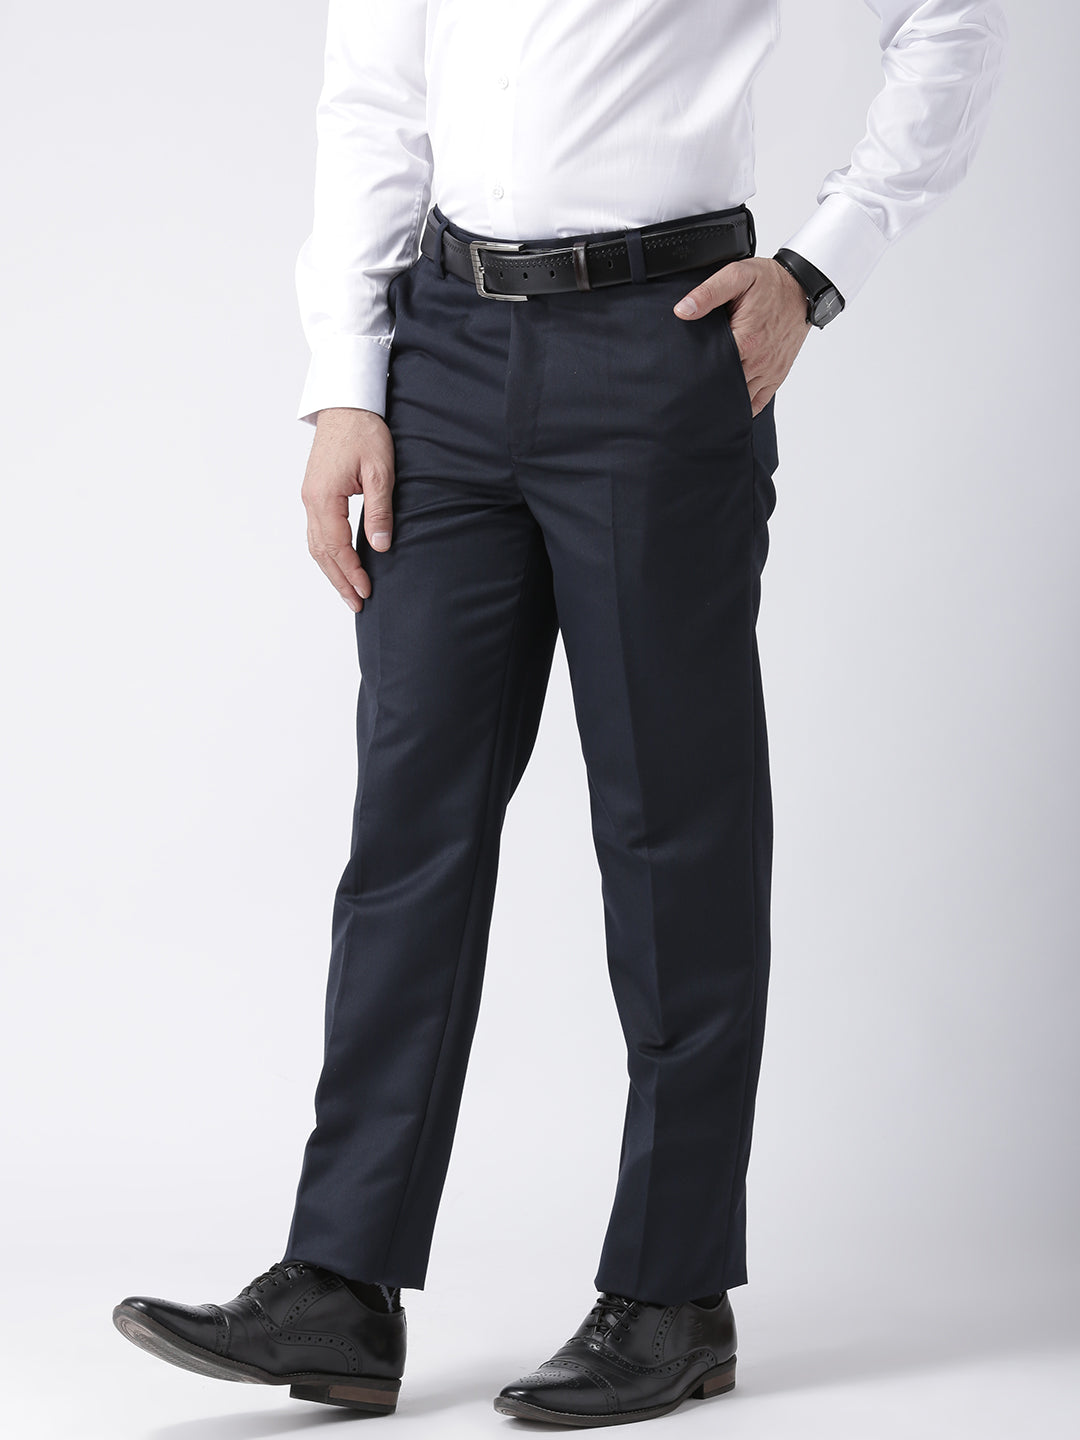 Korean Style Mens Formal Casual Pants Fashion Business Design Cotton  Trousers Simple Slim Fashionable Social Suits Pants 210524 From Cong01,  $68.36 | DHgate.Com